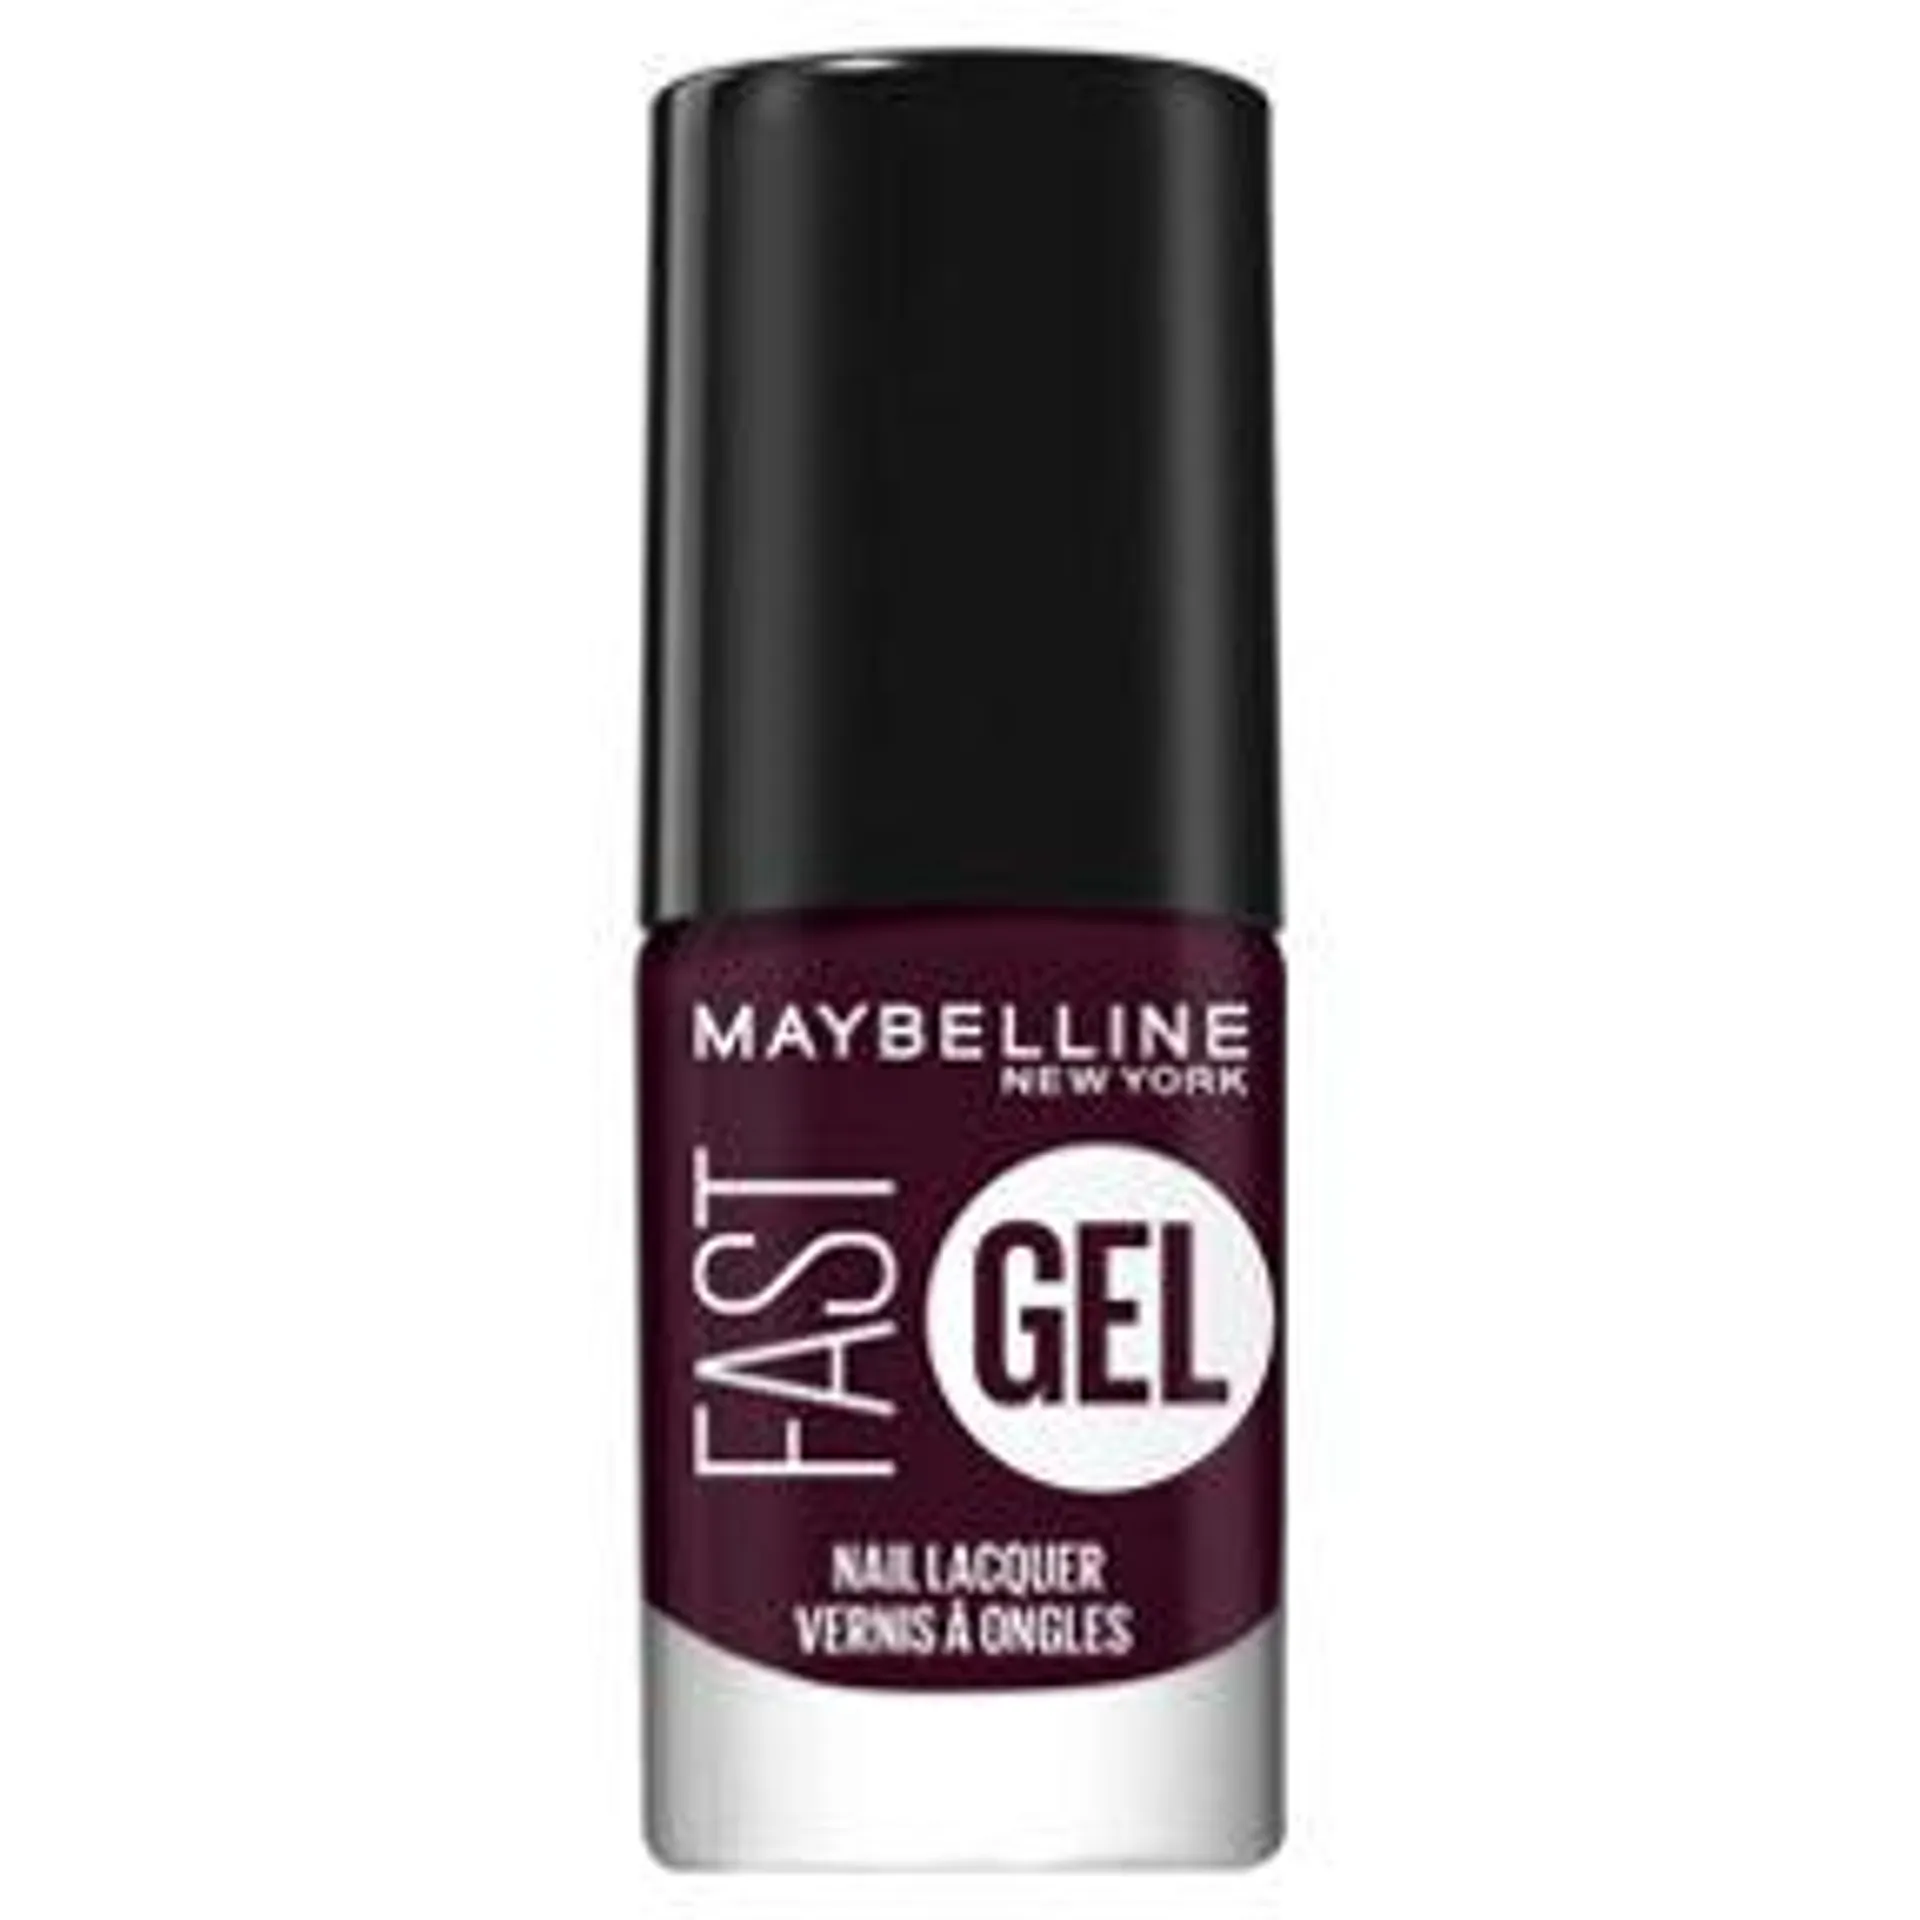 Maybelline Fast Gel Nail Lacquer Possessed Plum 13 Long-Lasting Nail Polish